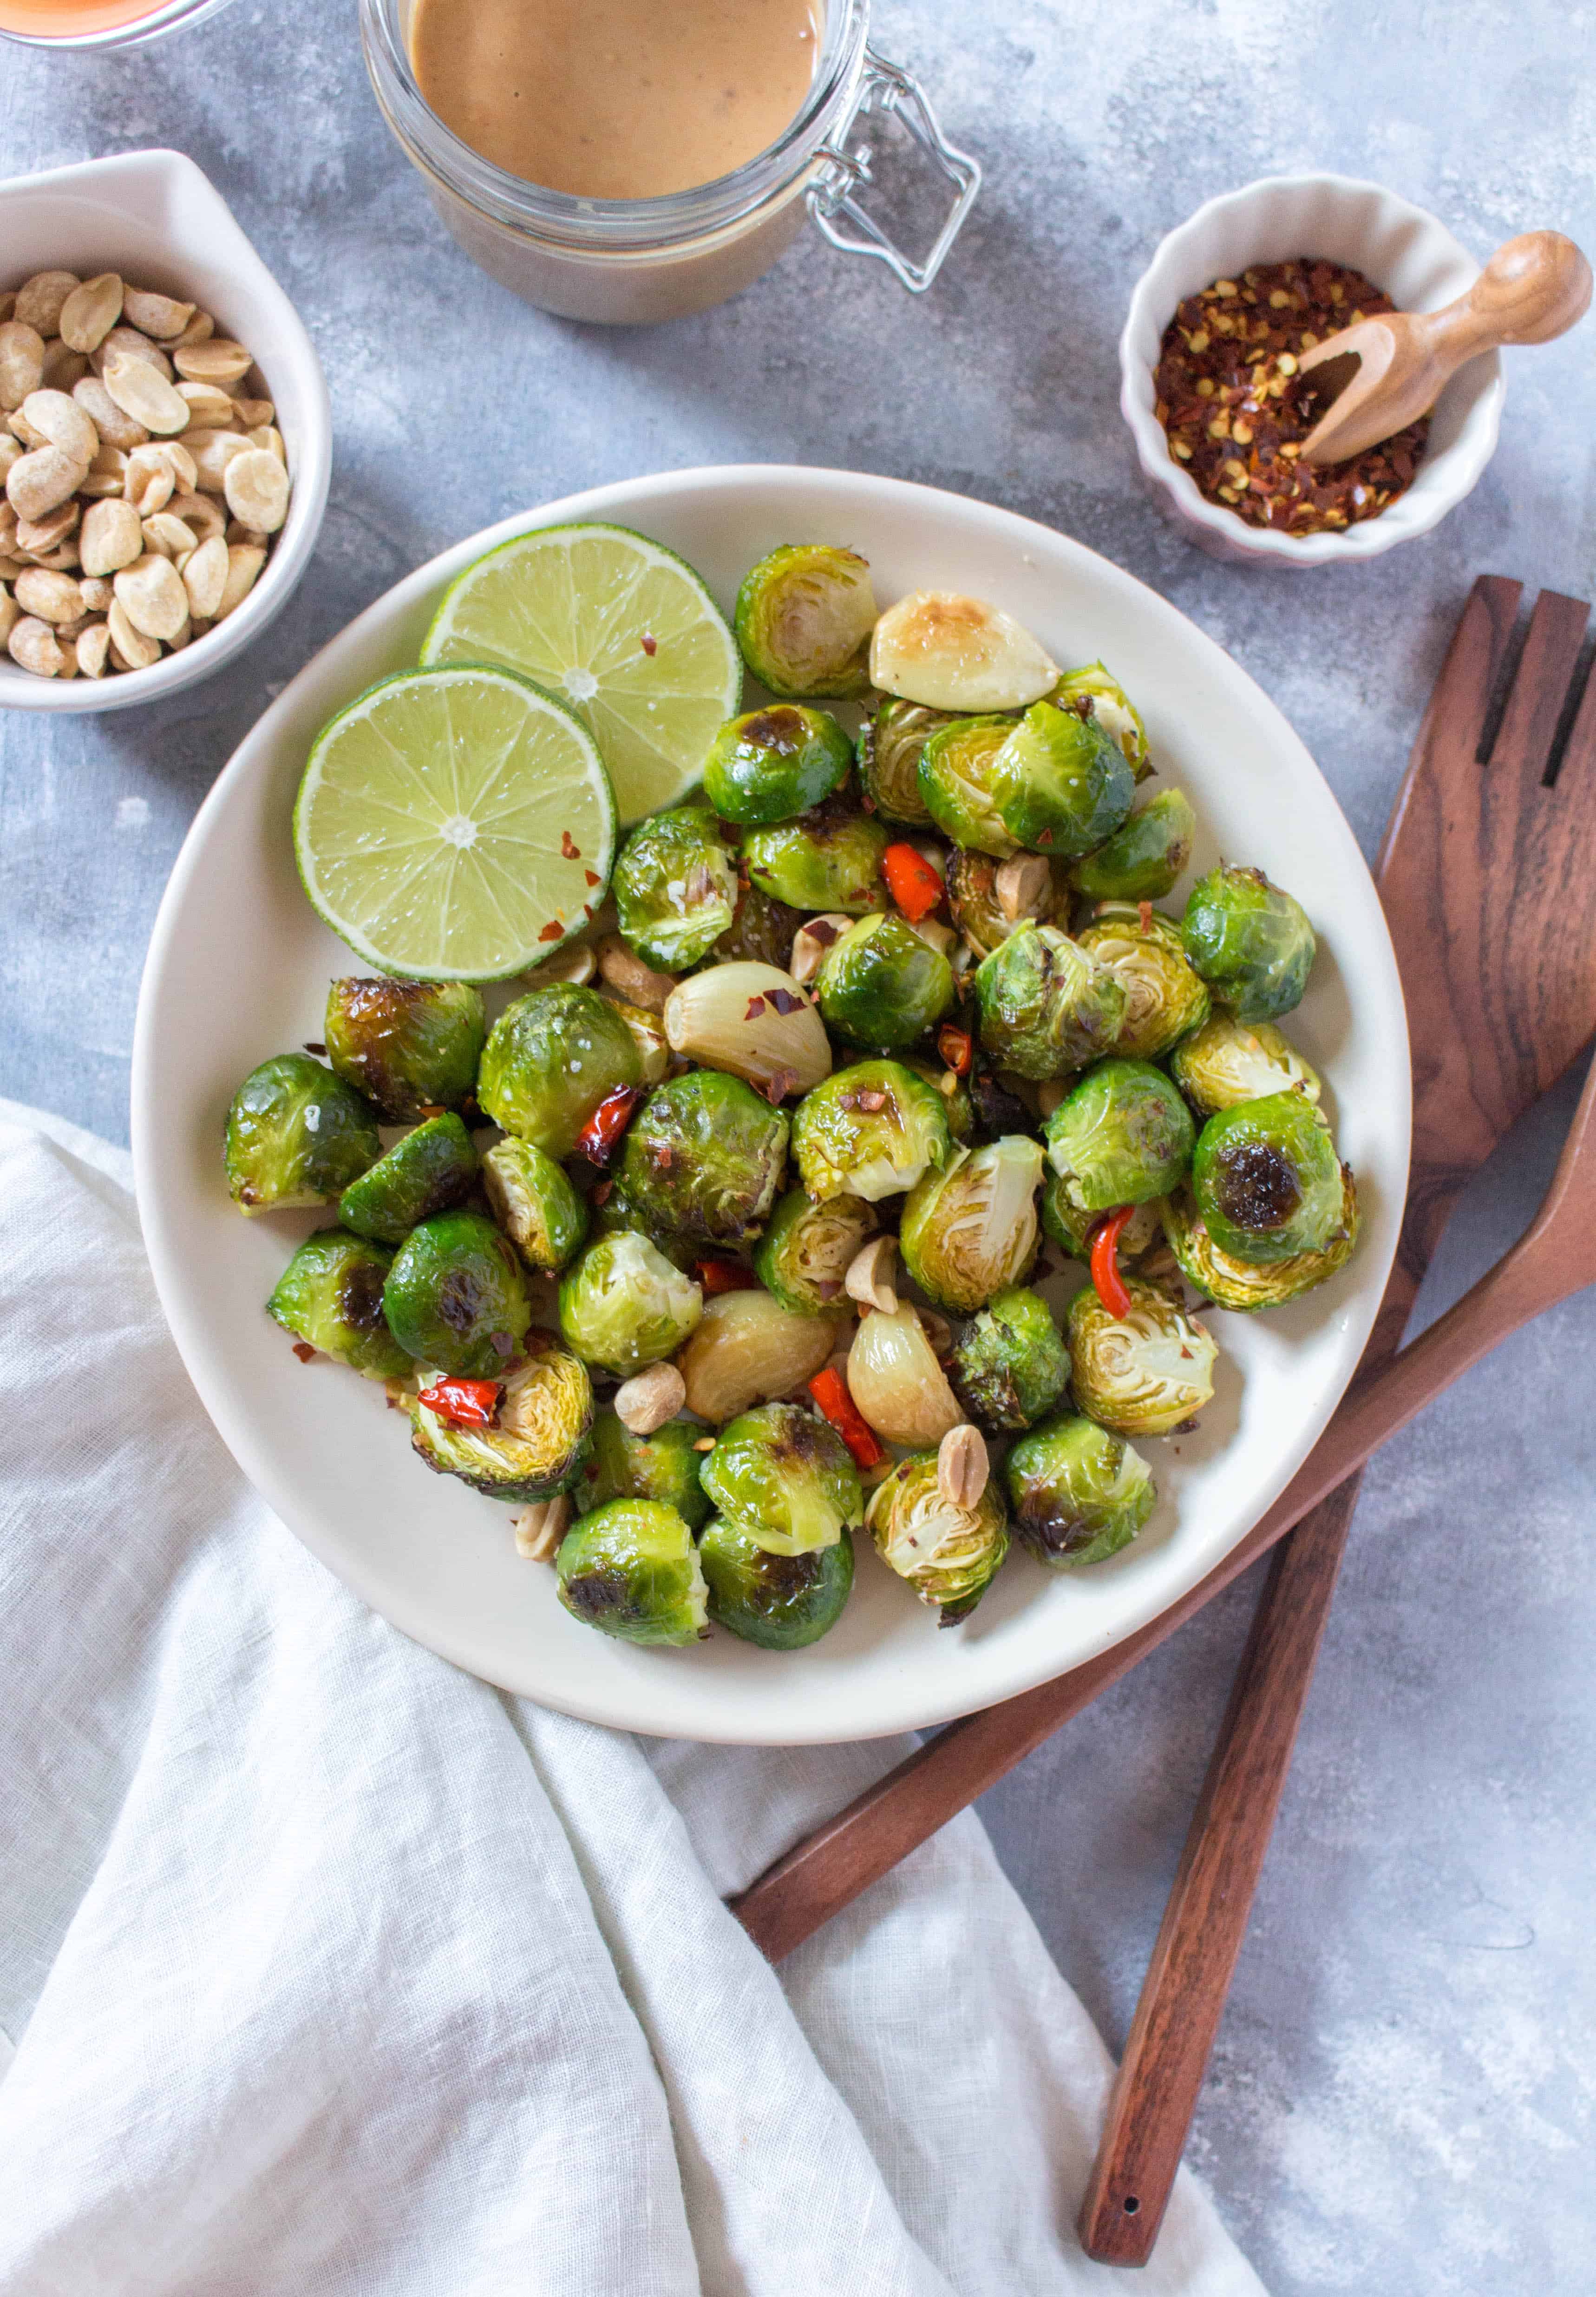 Looking to change up your regular ol' brussels sprouts? Mix things up with this Peanut Thai Chili Brussels Sprouts!